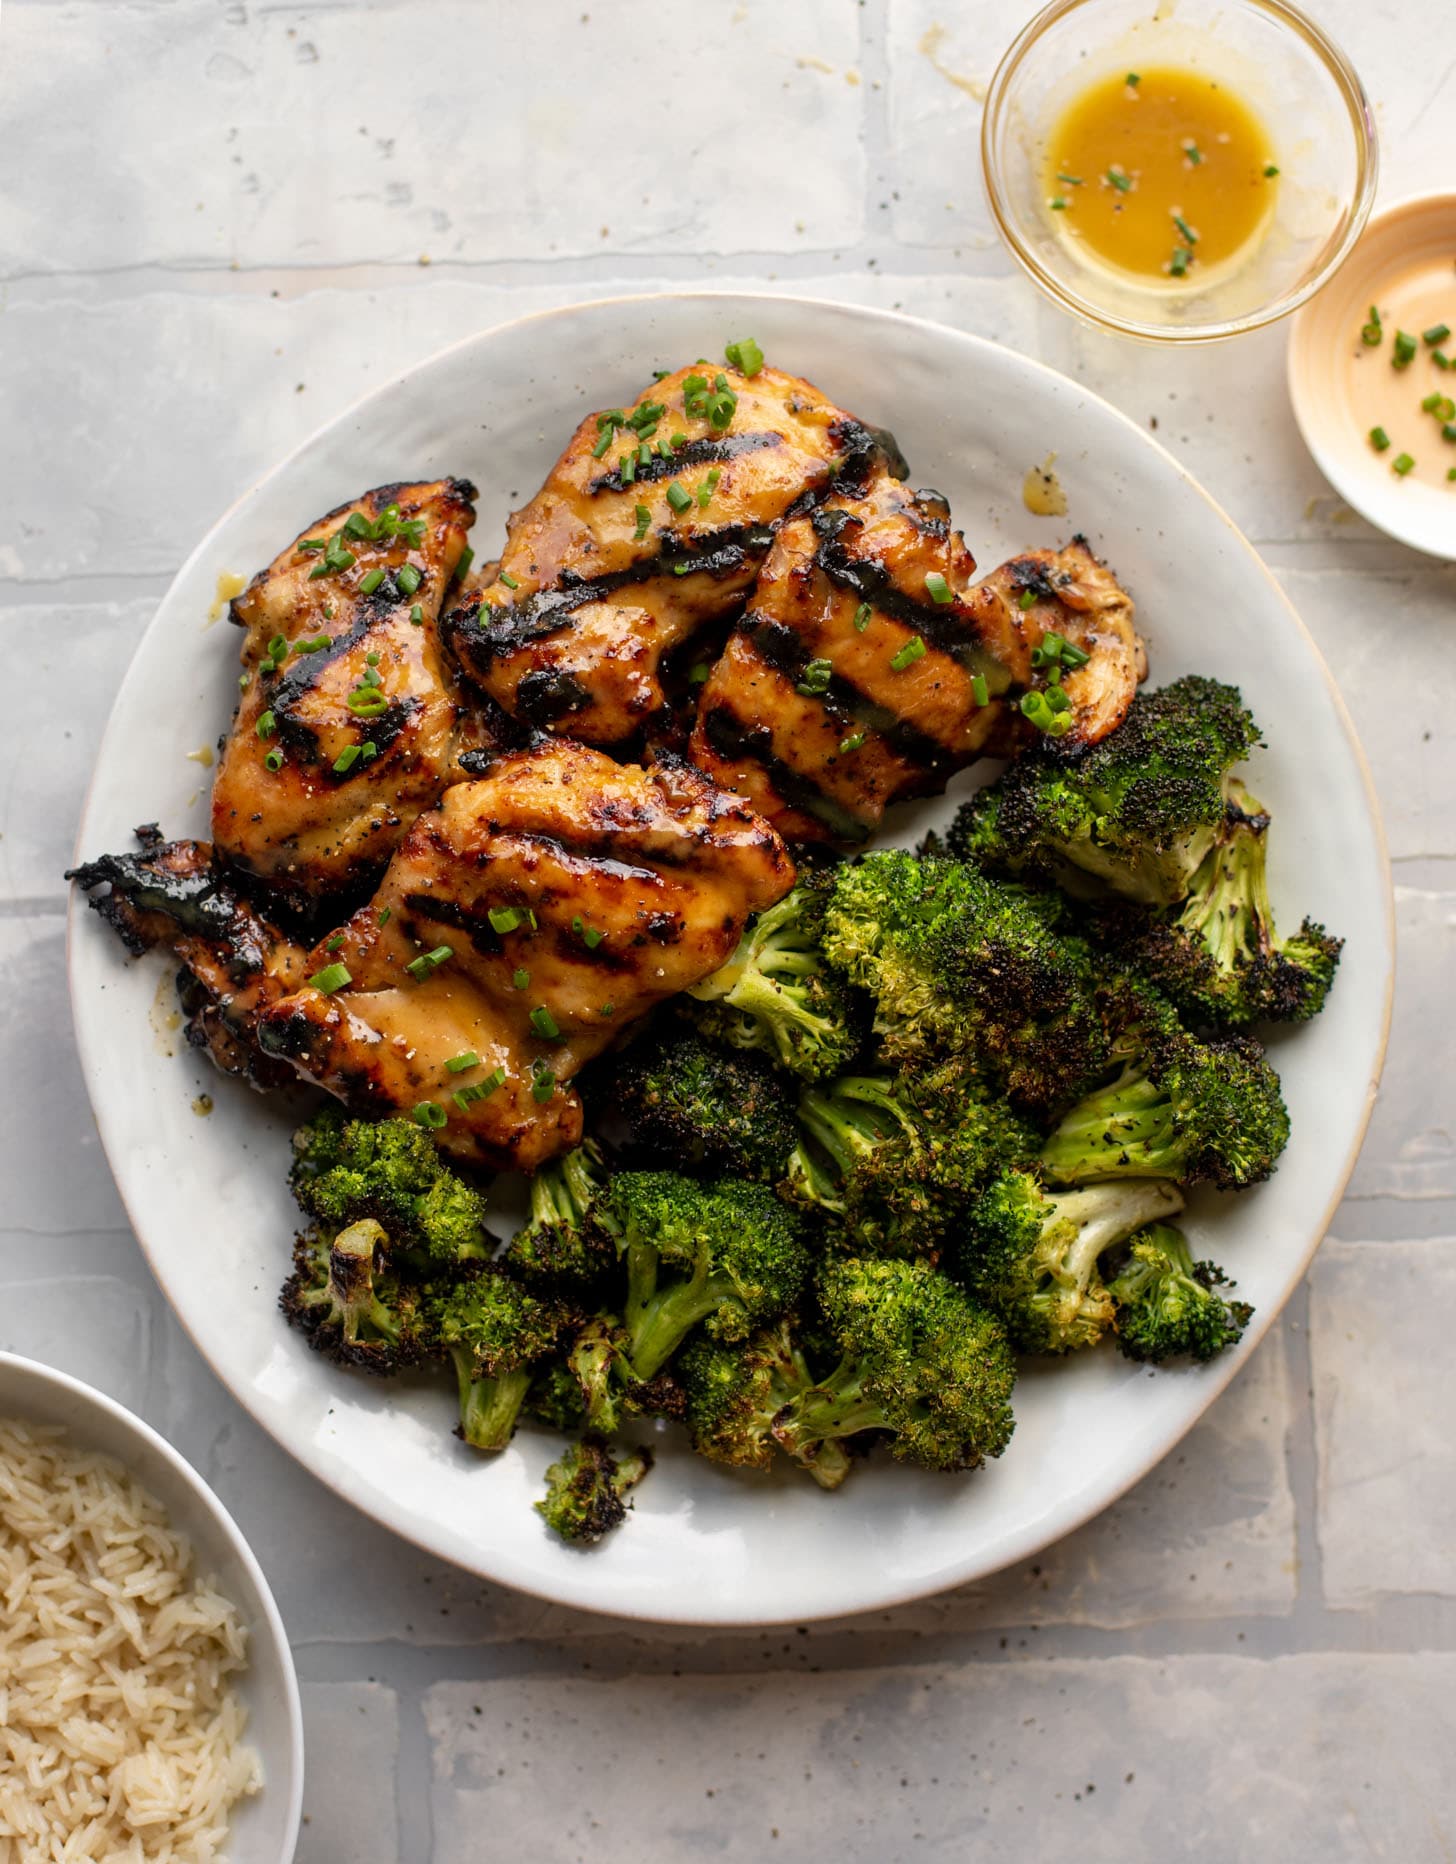 Grilled Honey Mustard Chicken and Broccoli.